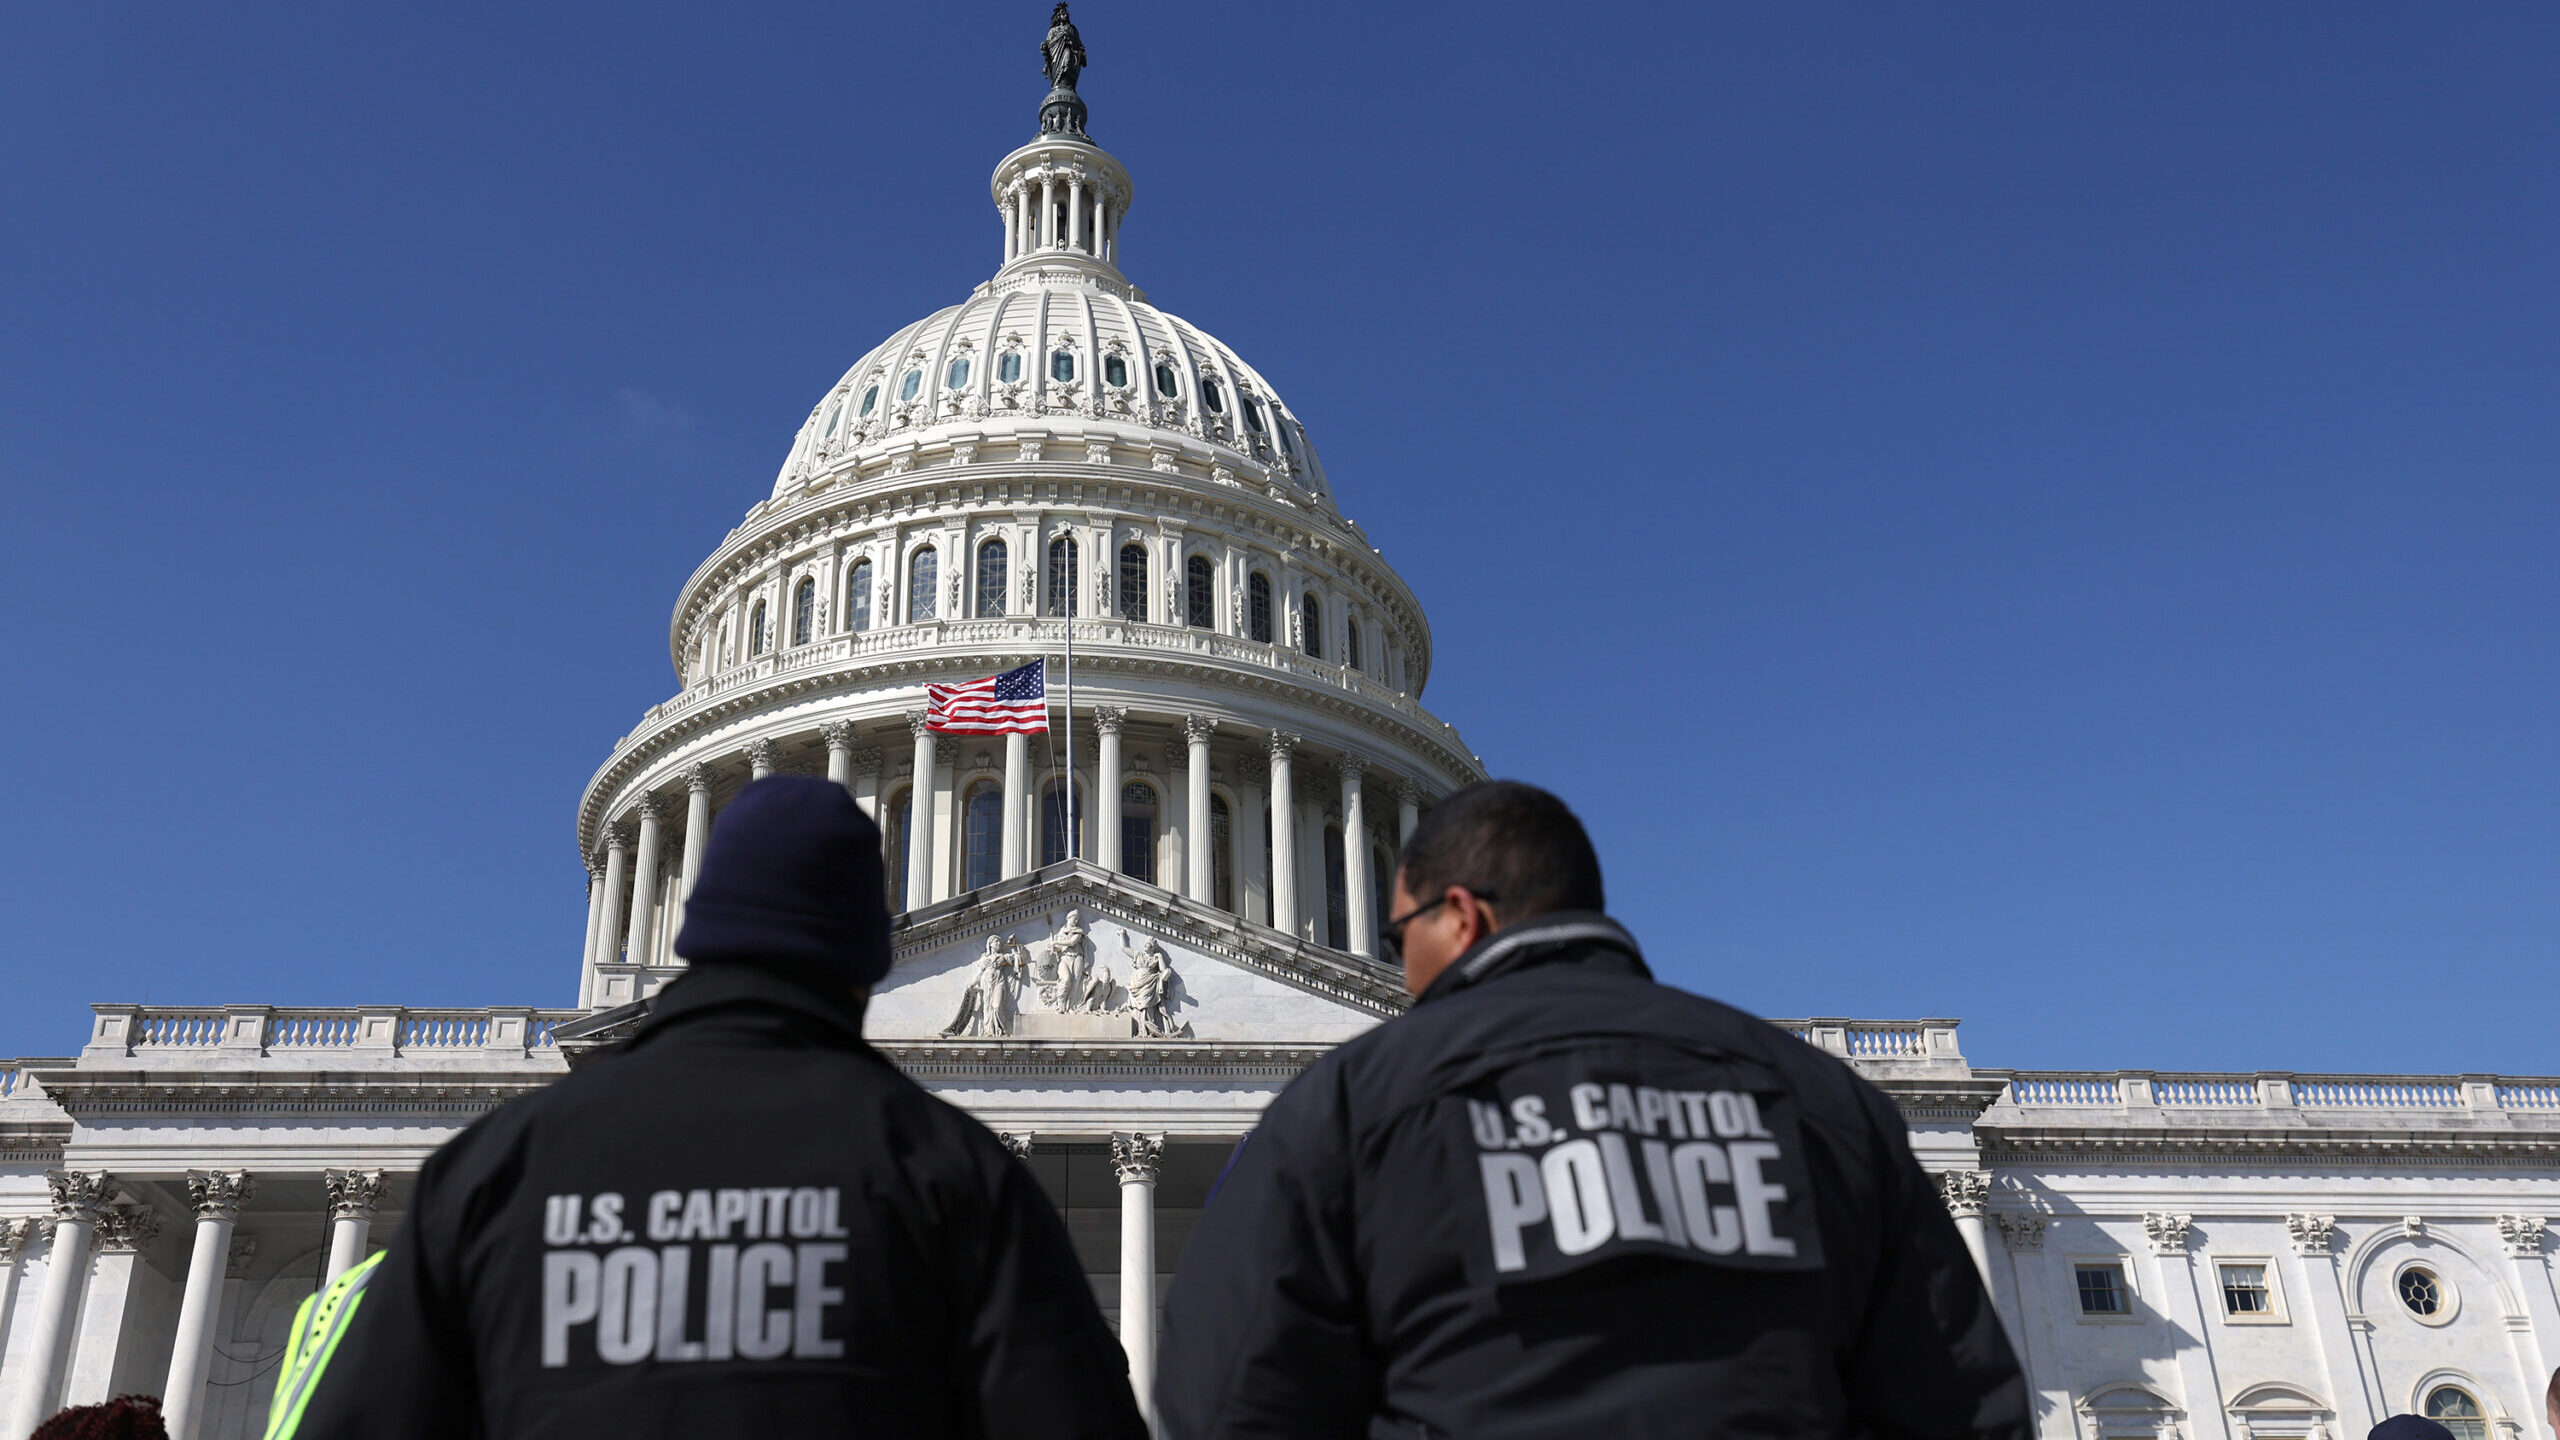 The US Capitol Police force "is not currently tracking any direct or credible threats to the US Cap...